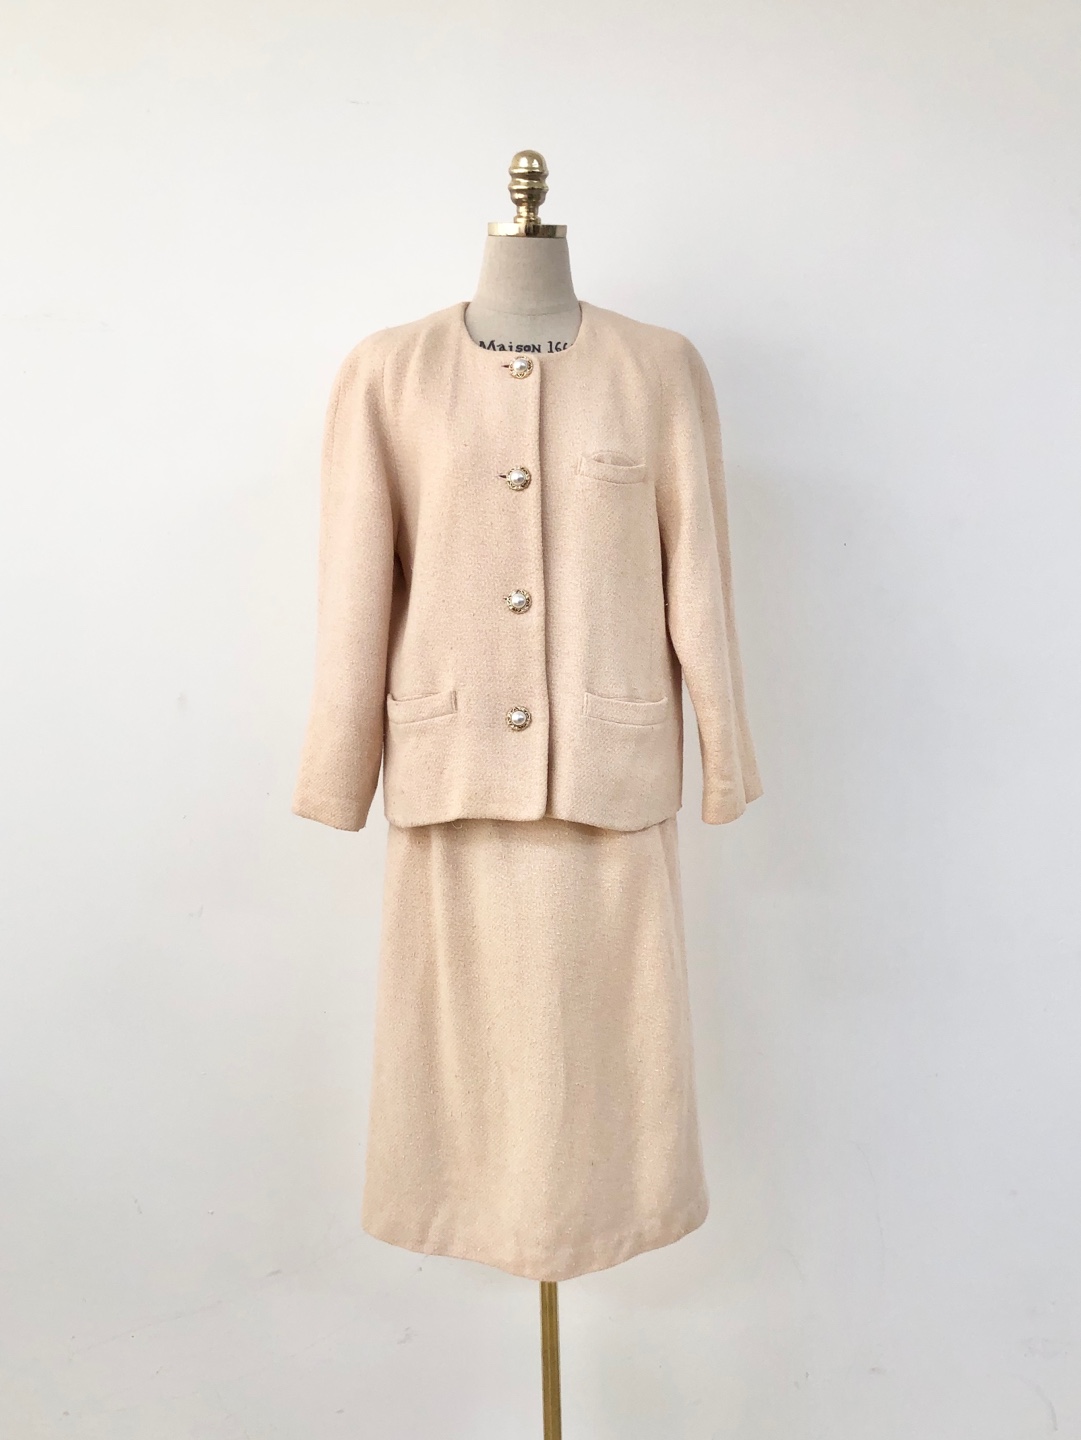 Pink pearl button tweed jacket skirt two-piece setup [29-31 inch]